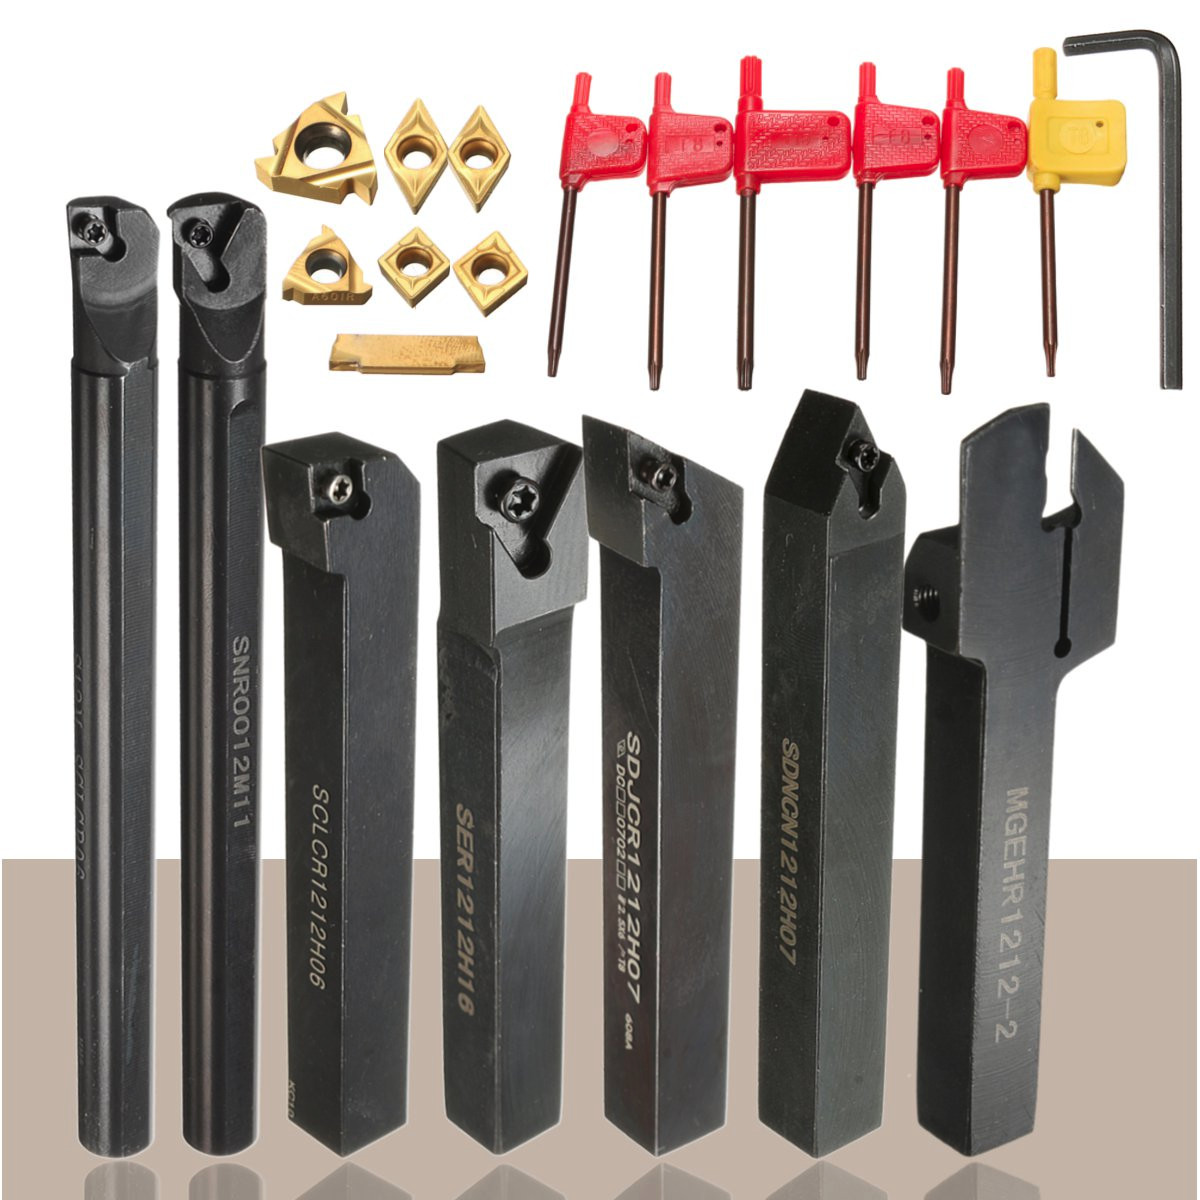 Drillpro-7pcs-12mm-Shank-Lathe-Set-Boring-Bar-Turning-Tool-Holder-with-Carbide-Inserts-CCMT060204-DC-1150453-2